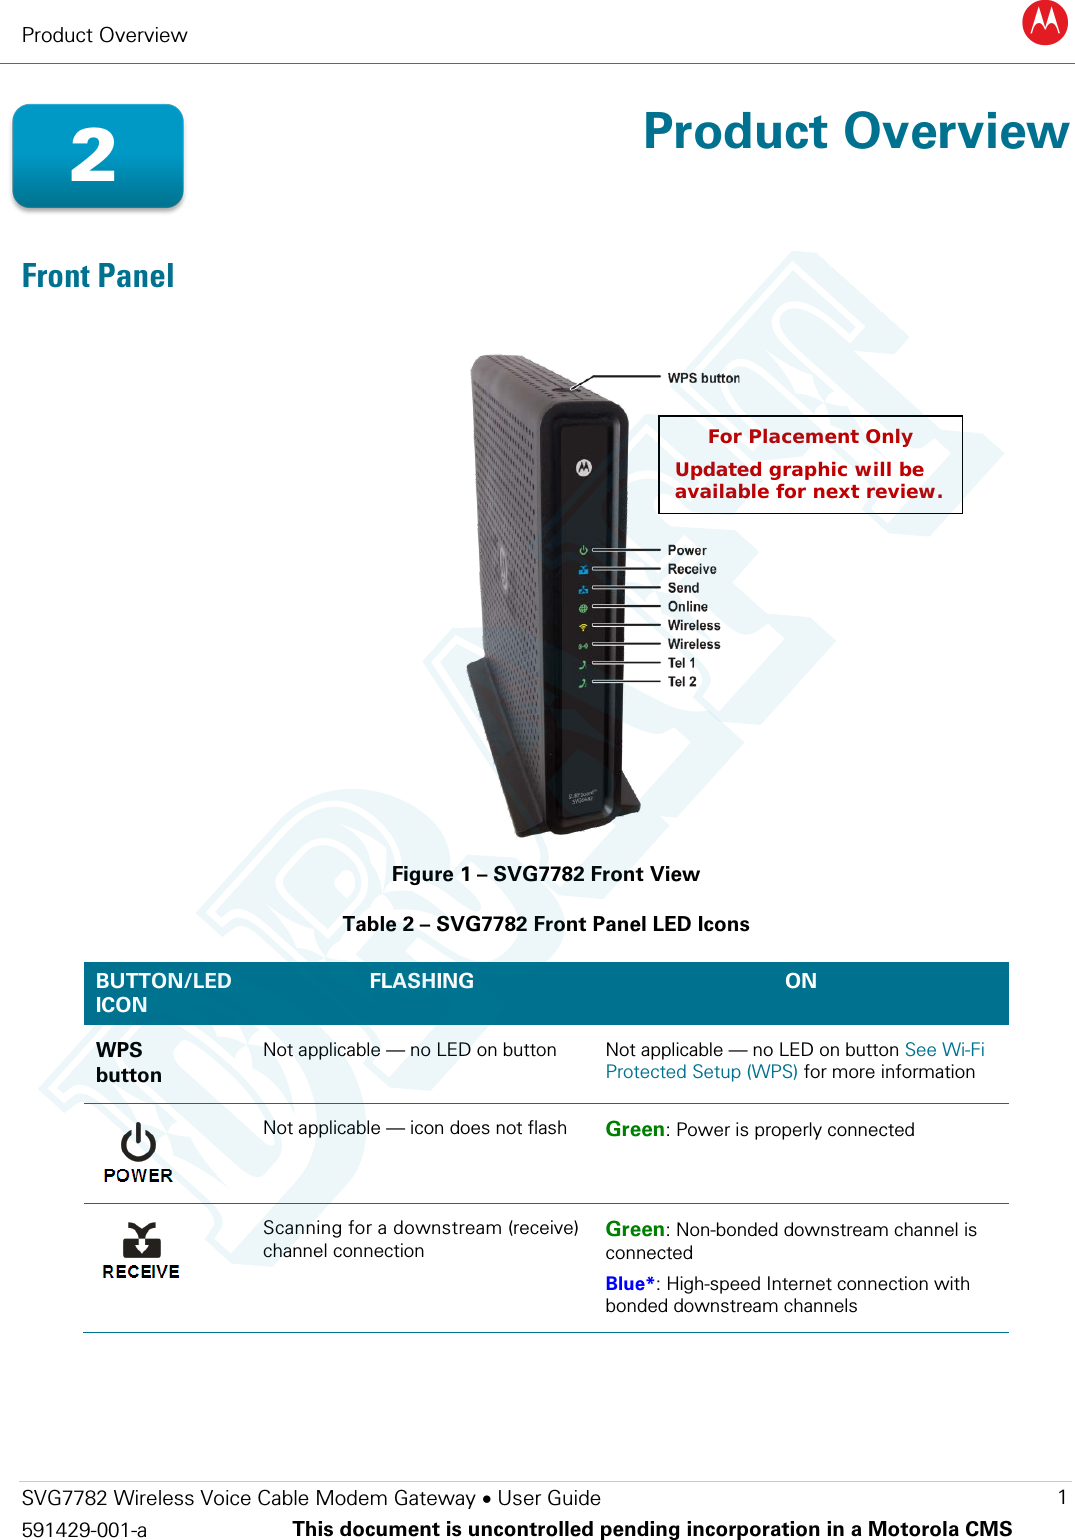 Product Overview B  SVG7782 Wireless Voice Cable Modem Gateway • User Guide 1 591429-001-a This document is uncontrolled pending incorporation in a Motorola CMS   Product Overview Front Panel  Figure 1 – SVG7782 Front View Table 2 – SVG7782 Front Panel LED Icons BUTTON/LED ICON FLASHING  ON  WPS button Not applicable — no LED on button   Not applicable — no LED on button See Wi-Fi Protected Setup (WPS) for more information  Not applicable — icon does not flash Green: Power is properly connected  Scanning for a downstream (receive) channel connection Green: Non-bonded downstream channel is connected Blue*: High-speed Internet connection with bonded downstream channels 2 For Placement Only  Updated graphic will be available for next review. DRAFT